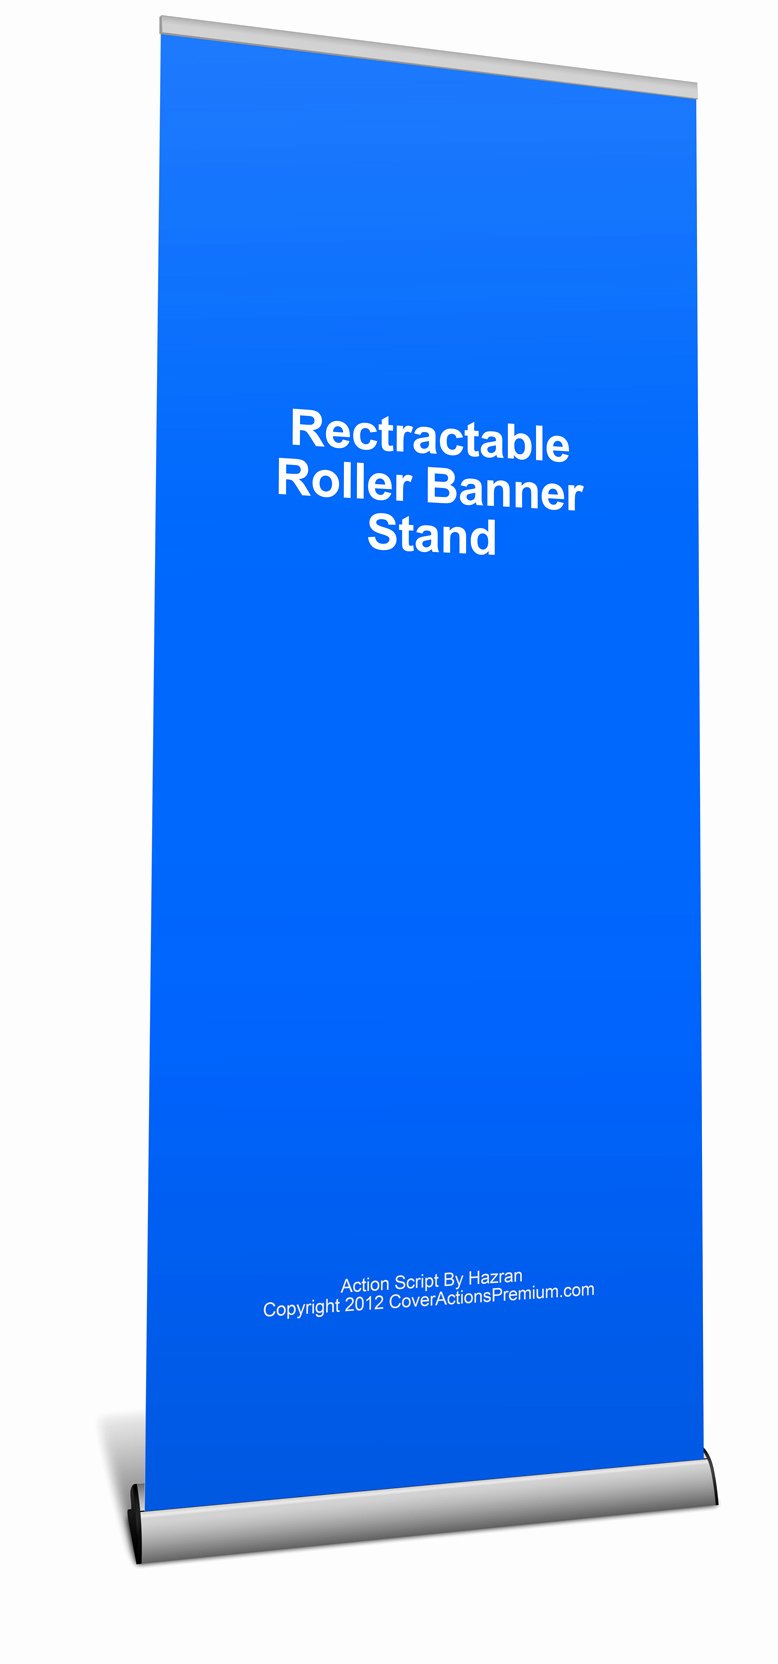 Retractable Banner Design Template Awesome Retractable Roller Banner Mockup